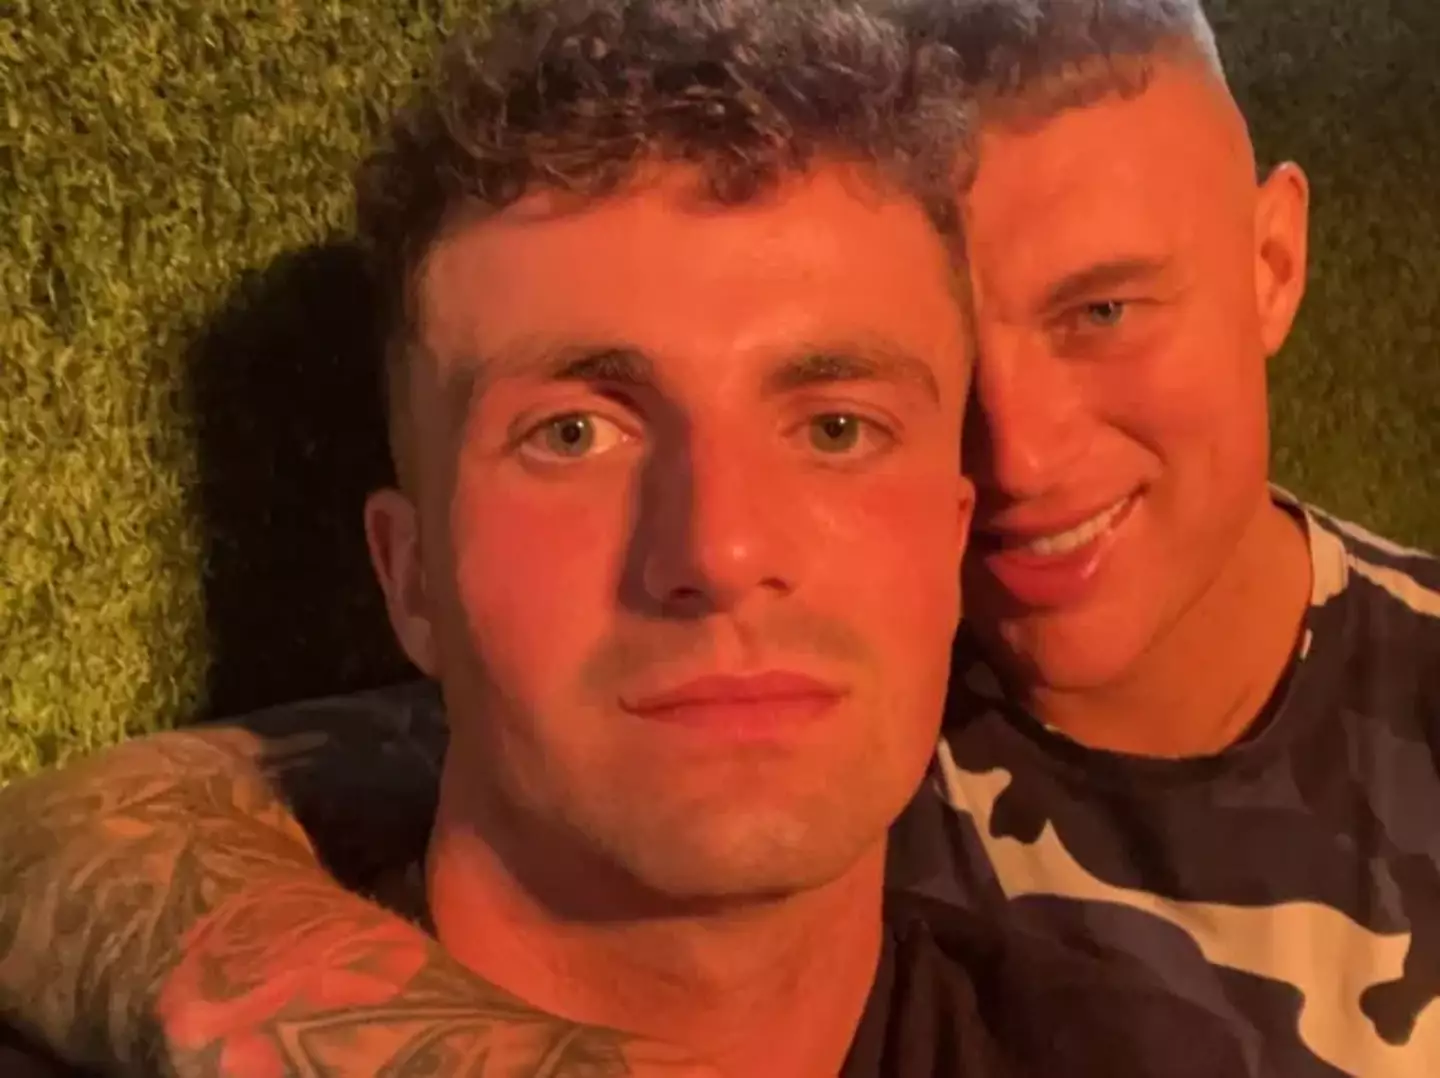 Grant Coulson says he slept with at least 30 women during his time on Geordie Shore.